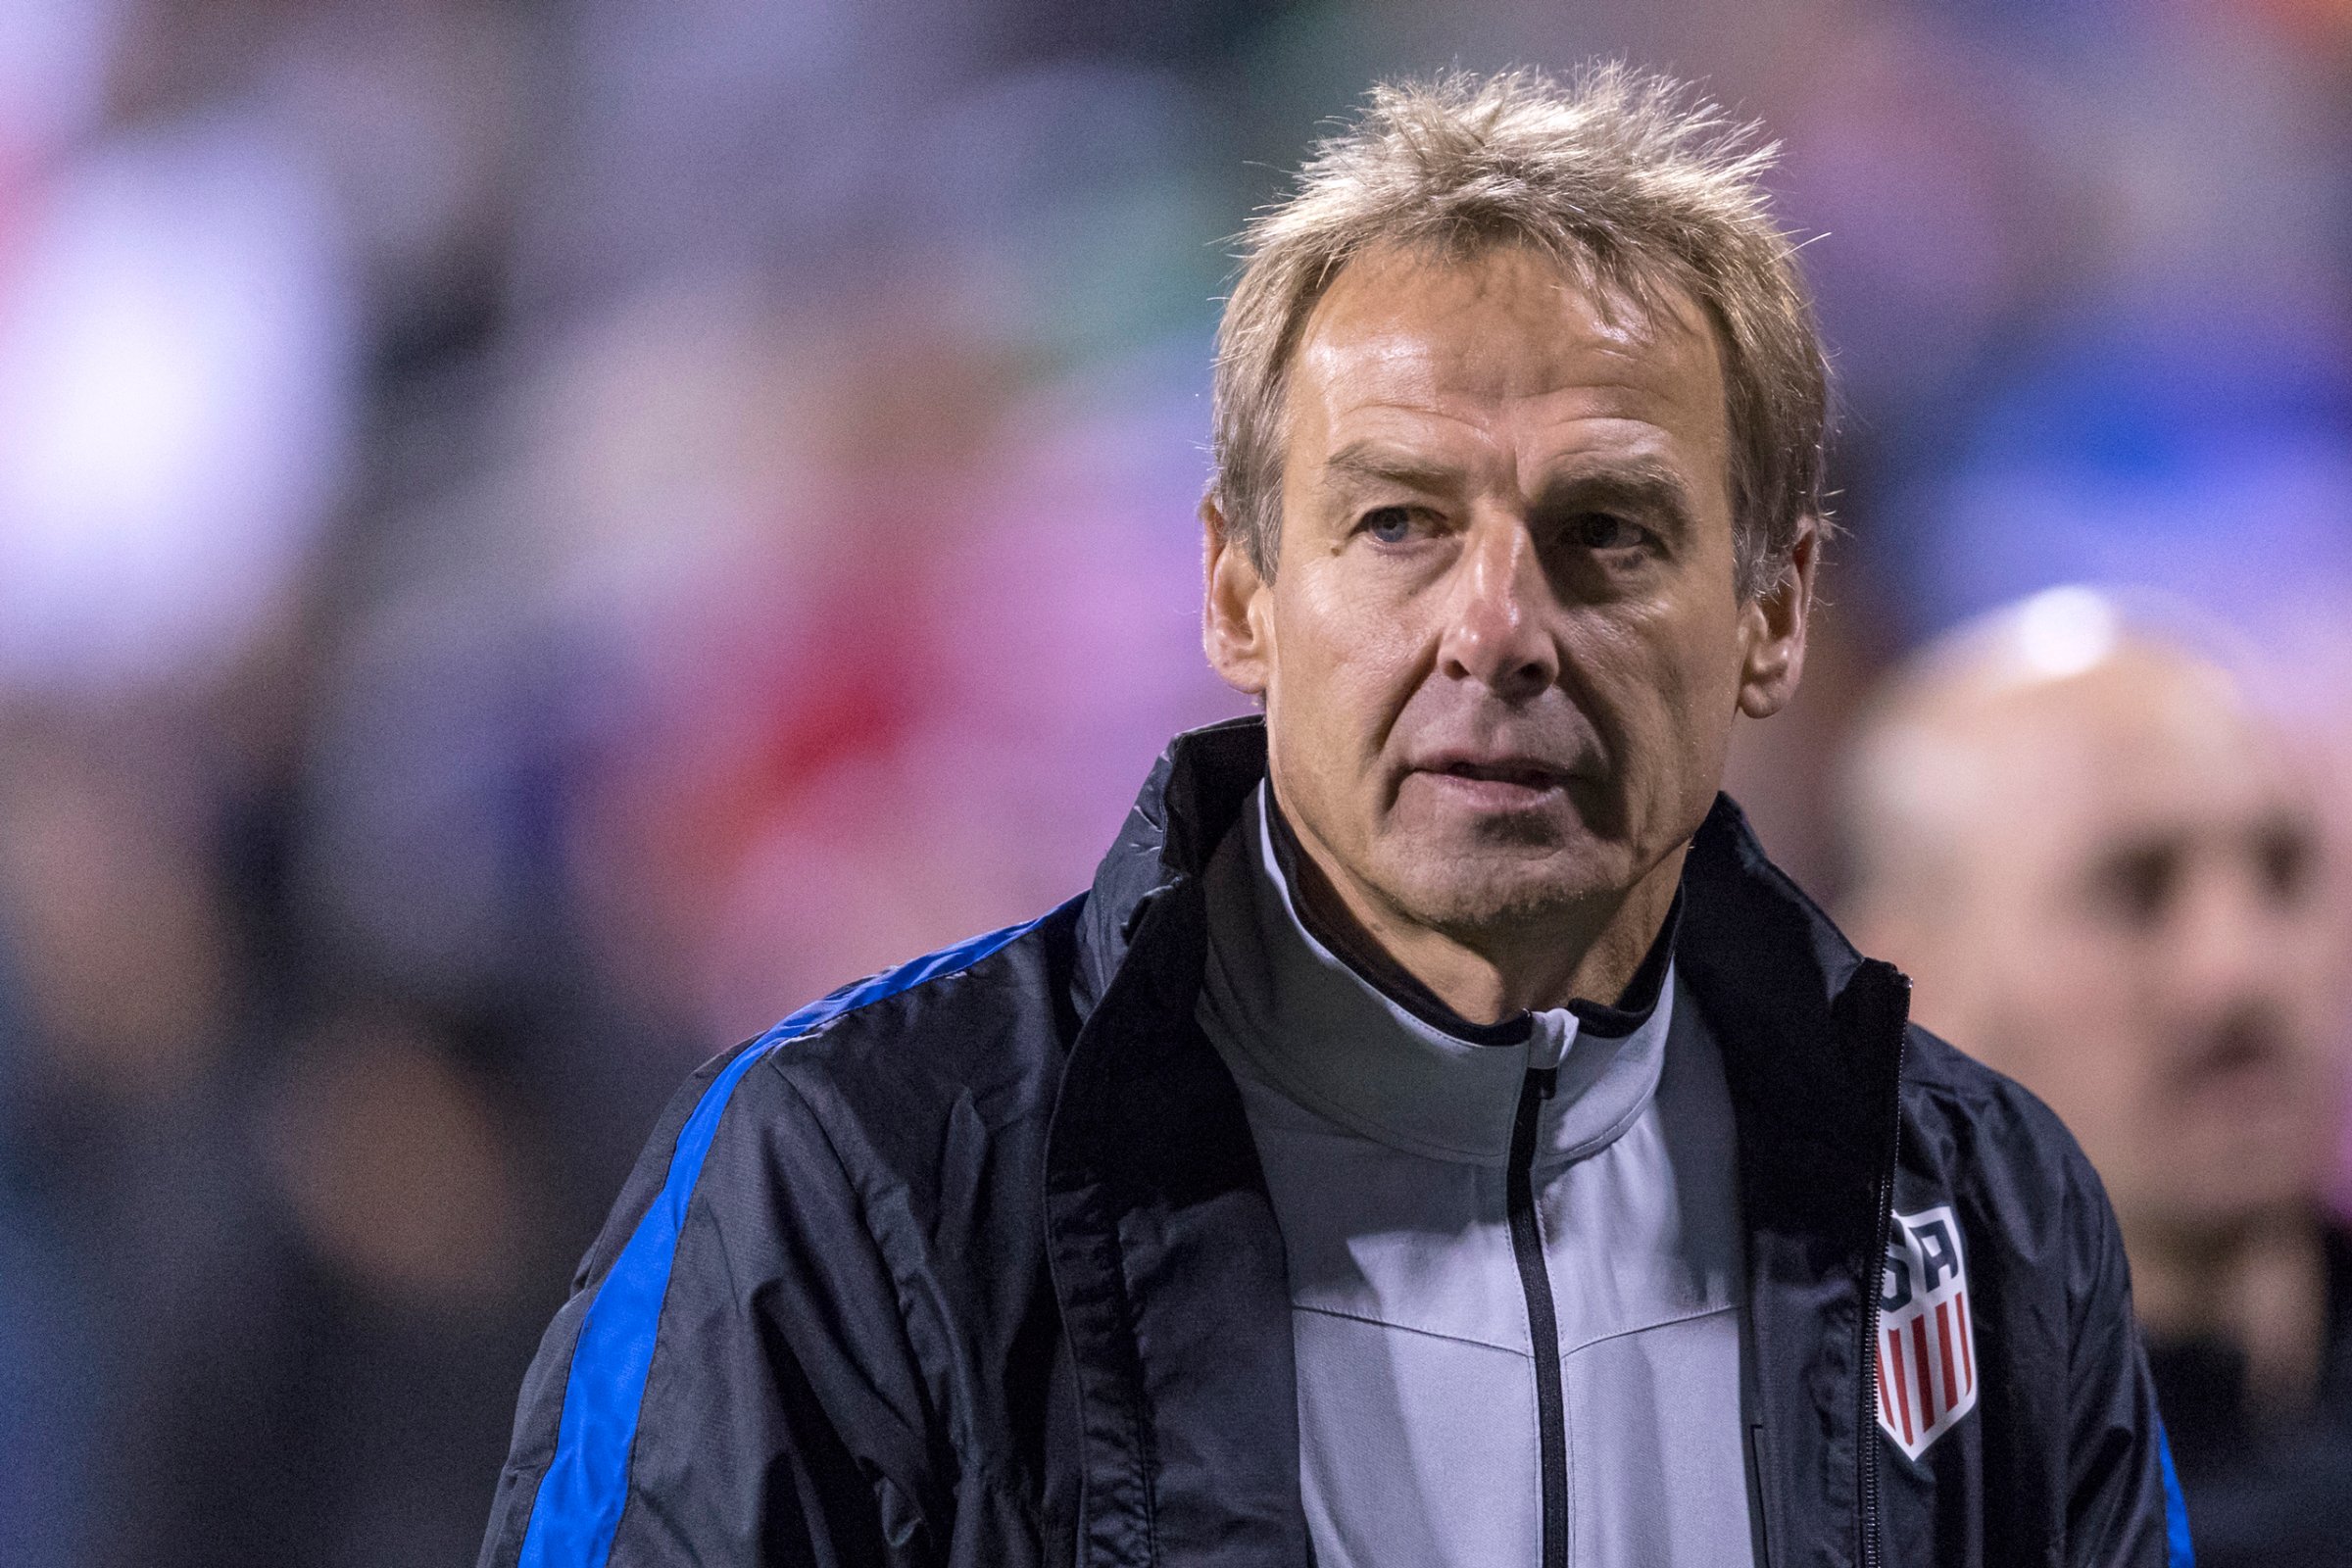 COLUMBUS, OH - NOVEMBER 11: United States Men's National Team head coach Jurgen Klinsmann walks off the field after the first half during the FIFA 2018 World Cup Qualifier at MAPFRE Stadium on November 11, 2016 in Columbus, Ohio. Mexico defeated the United States by the score of 2-1. (Photo by Robin Alam/Icon Sportswire) (Icon Sportswire via AP Images)